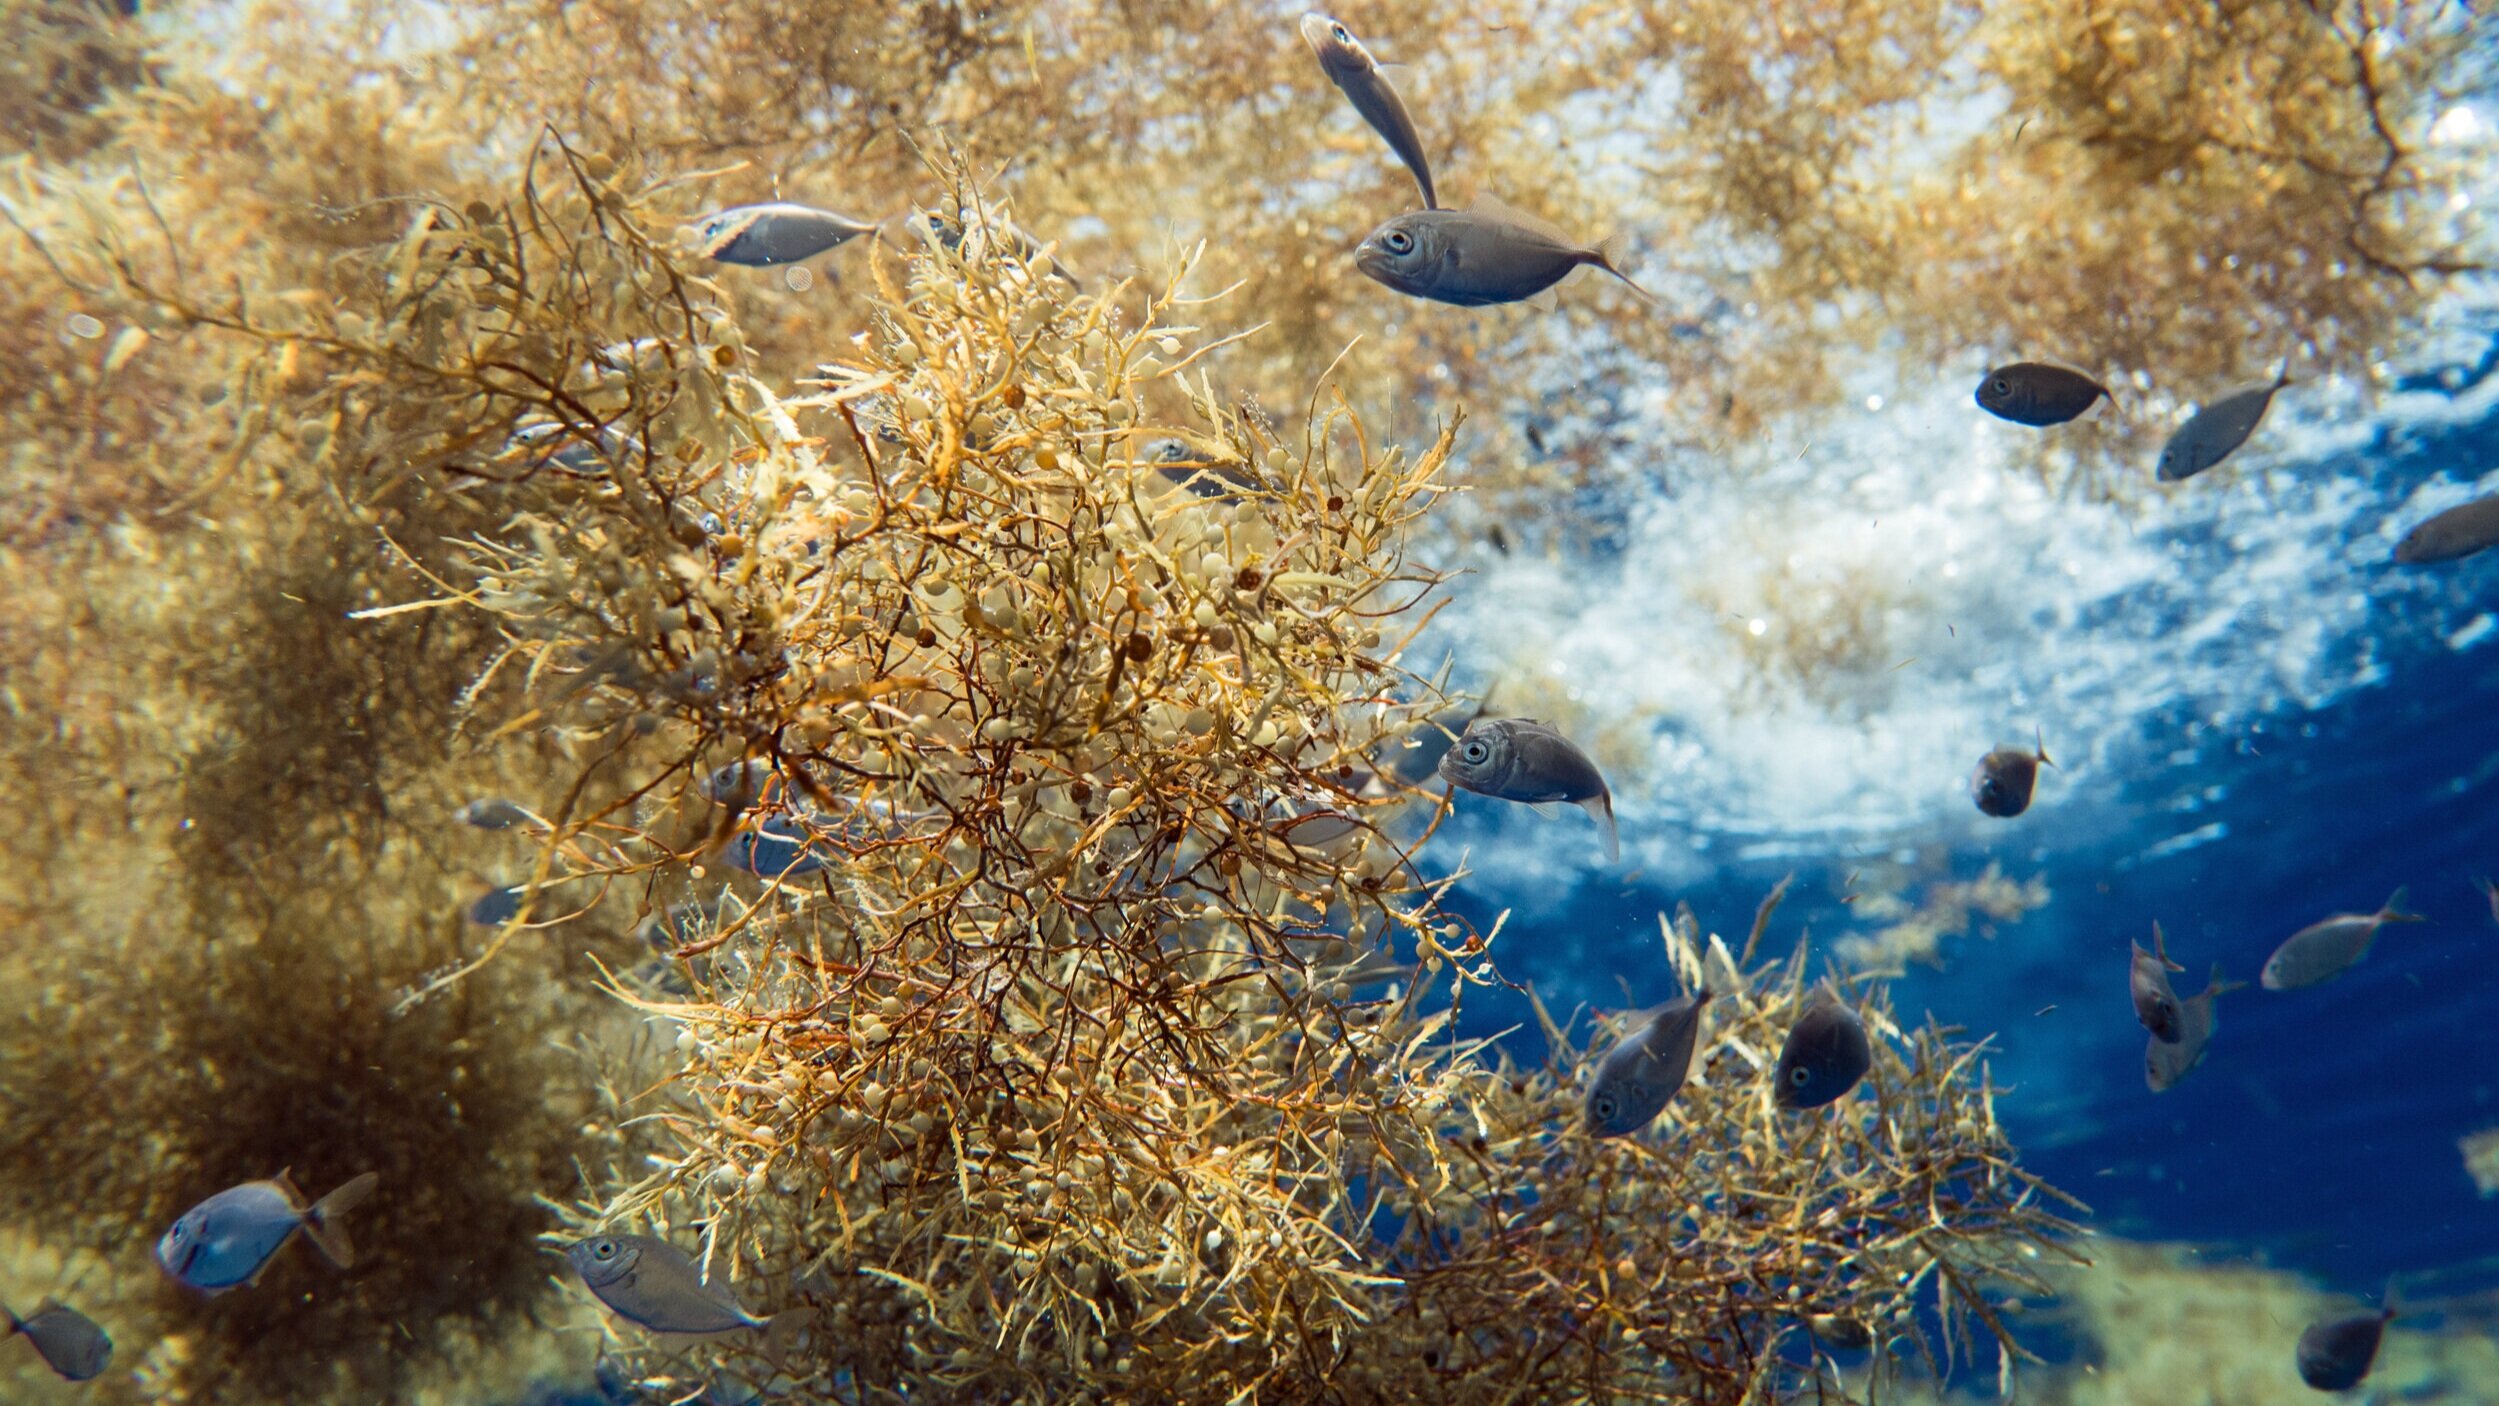 Sargassum seaweed can live its entire life cycle floating in the open ocean, and is home to many small fish and invertebrates, acting as a natural FAD.